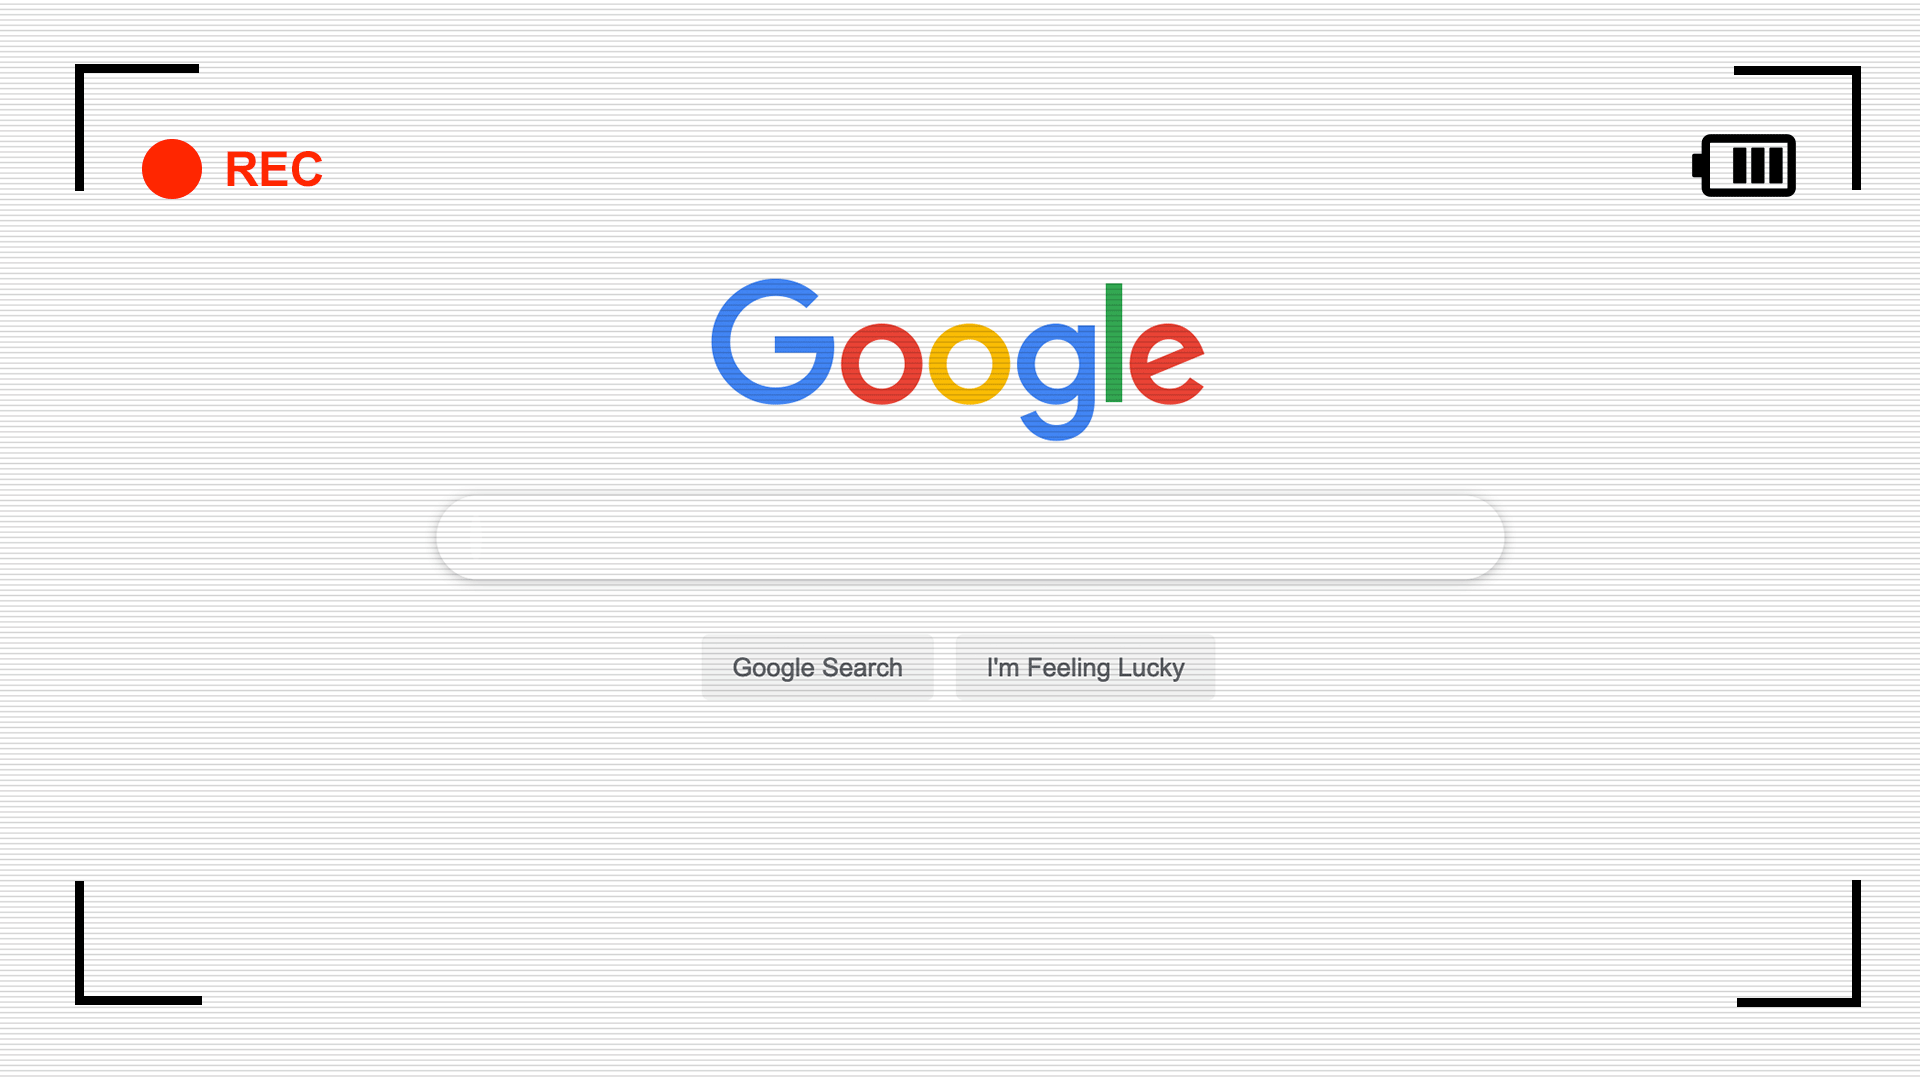 Animation of a Google search screen with a flashing red "Recording" button